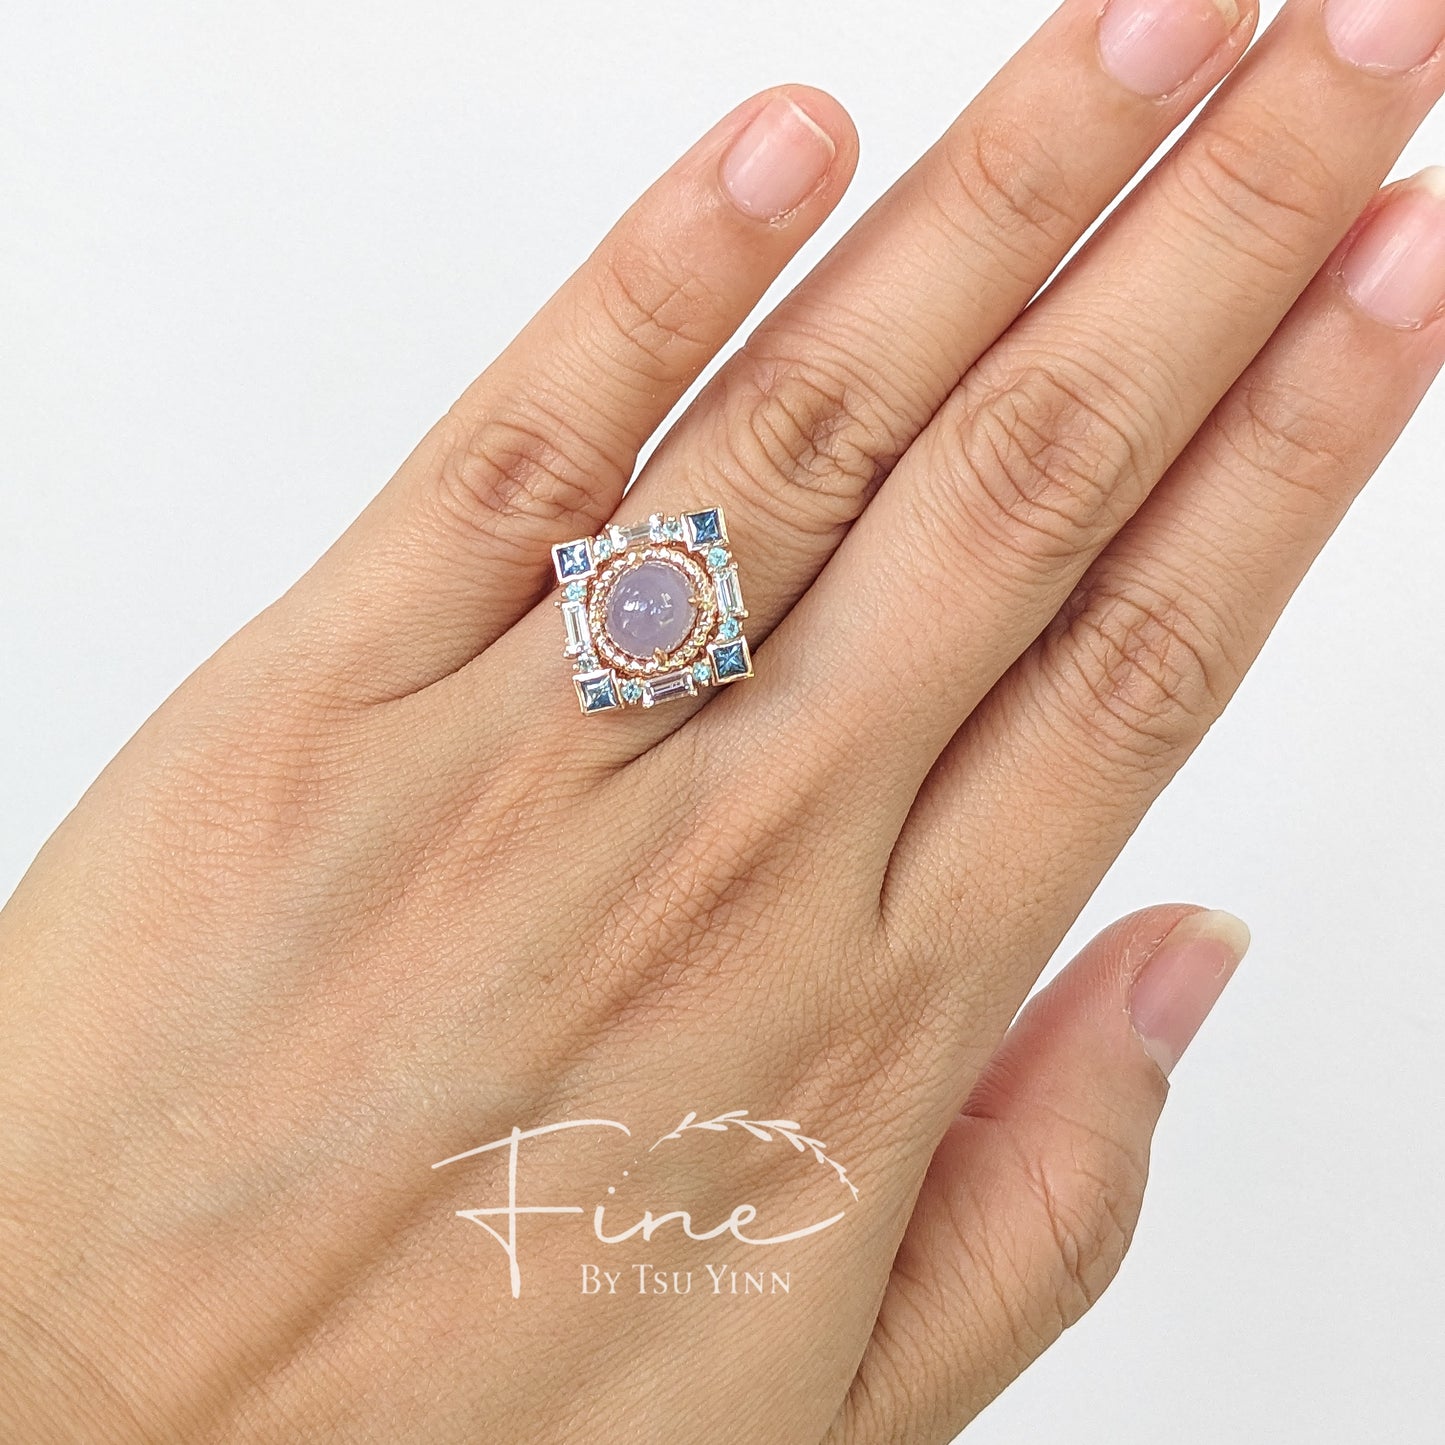 RG FBTY Brigette Halo Ring with Lavender Jadeite, Paraiba Tourmalines, and Teal and White Sapphires